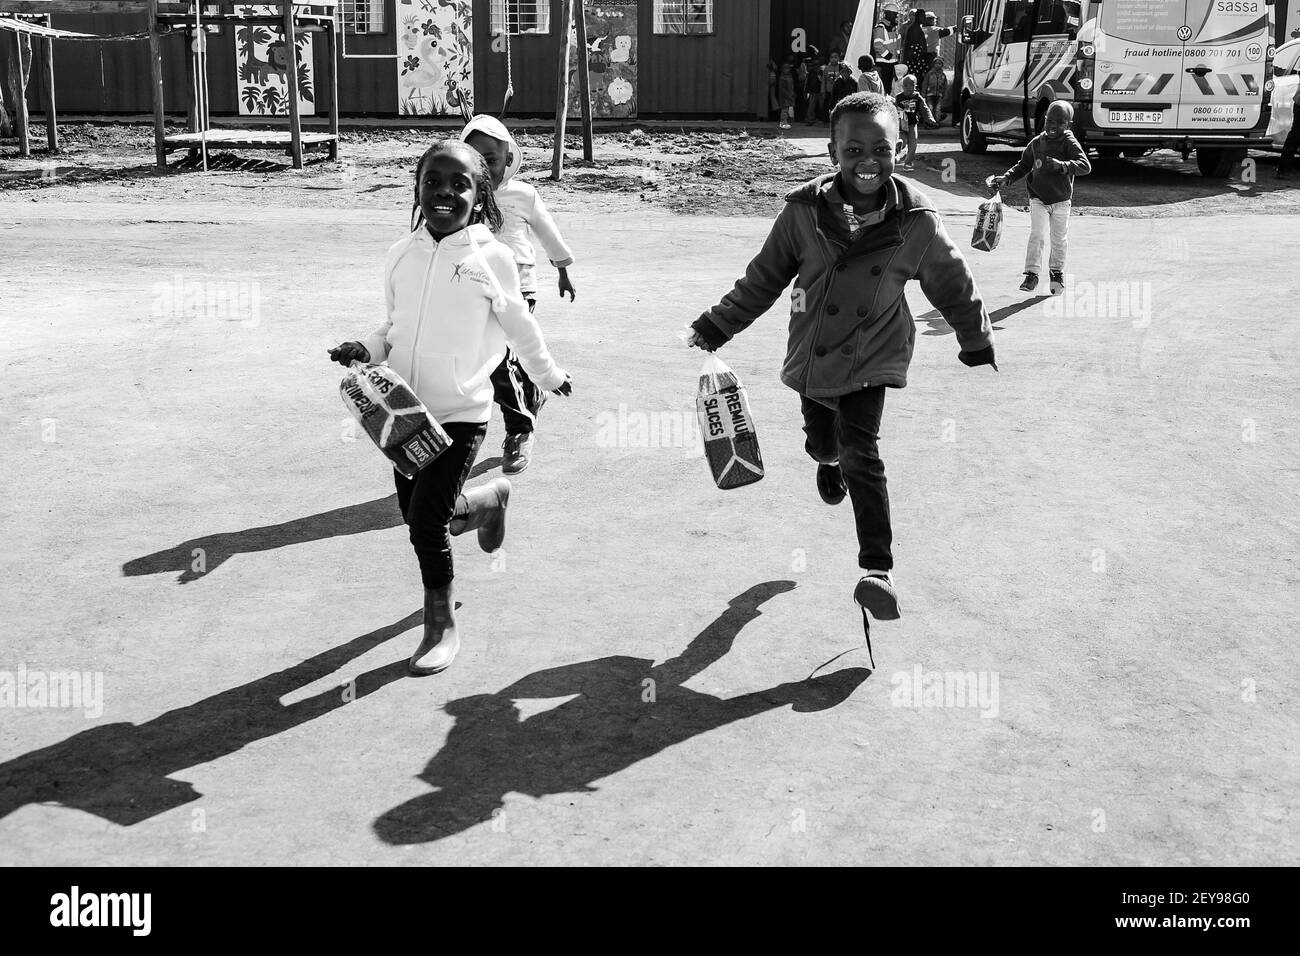 JOHANNESBURG, SOUTH AFRICA - Jan 05, 2021: Soweto, South Africa - July 18, 2016: Young African Preschool kids running with a loaf of bread in the play Stock Photo